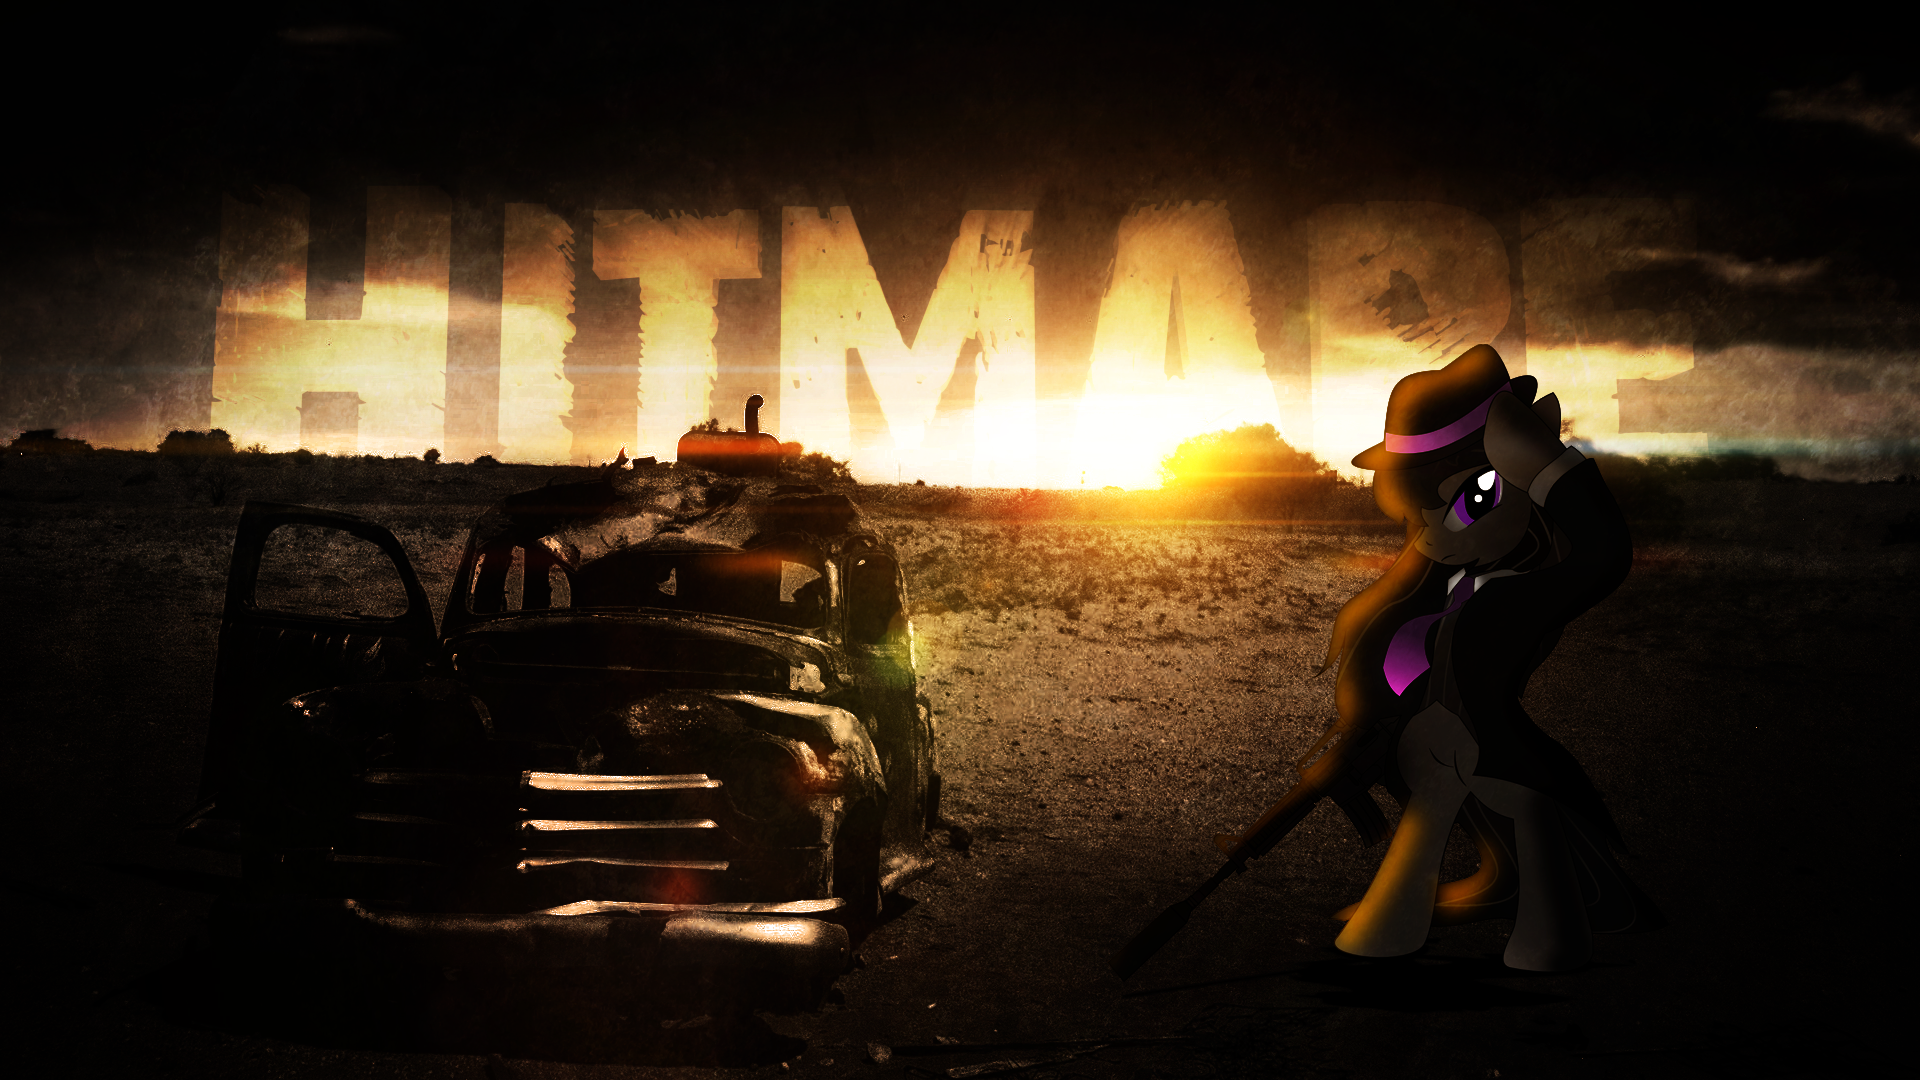 Hitmare by ShySolid, Vexx3 and Zedrin